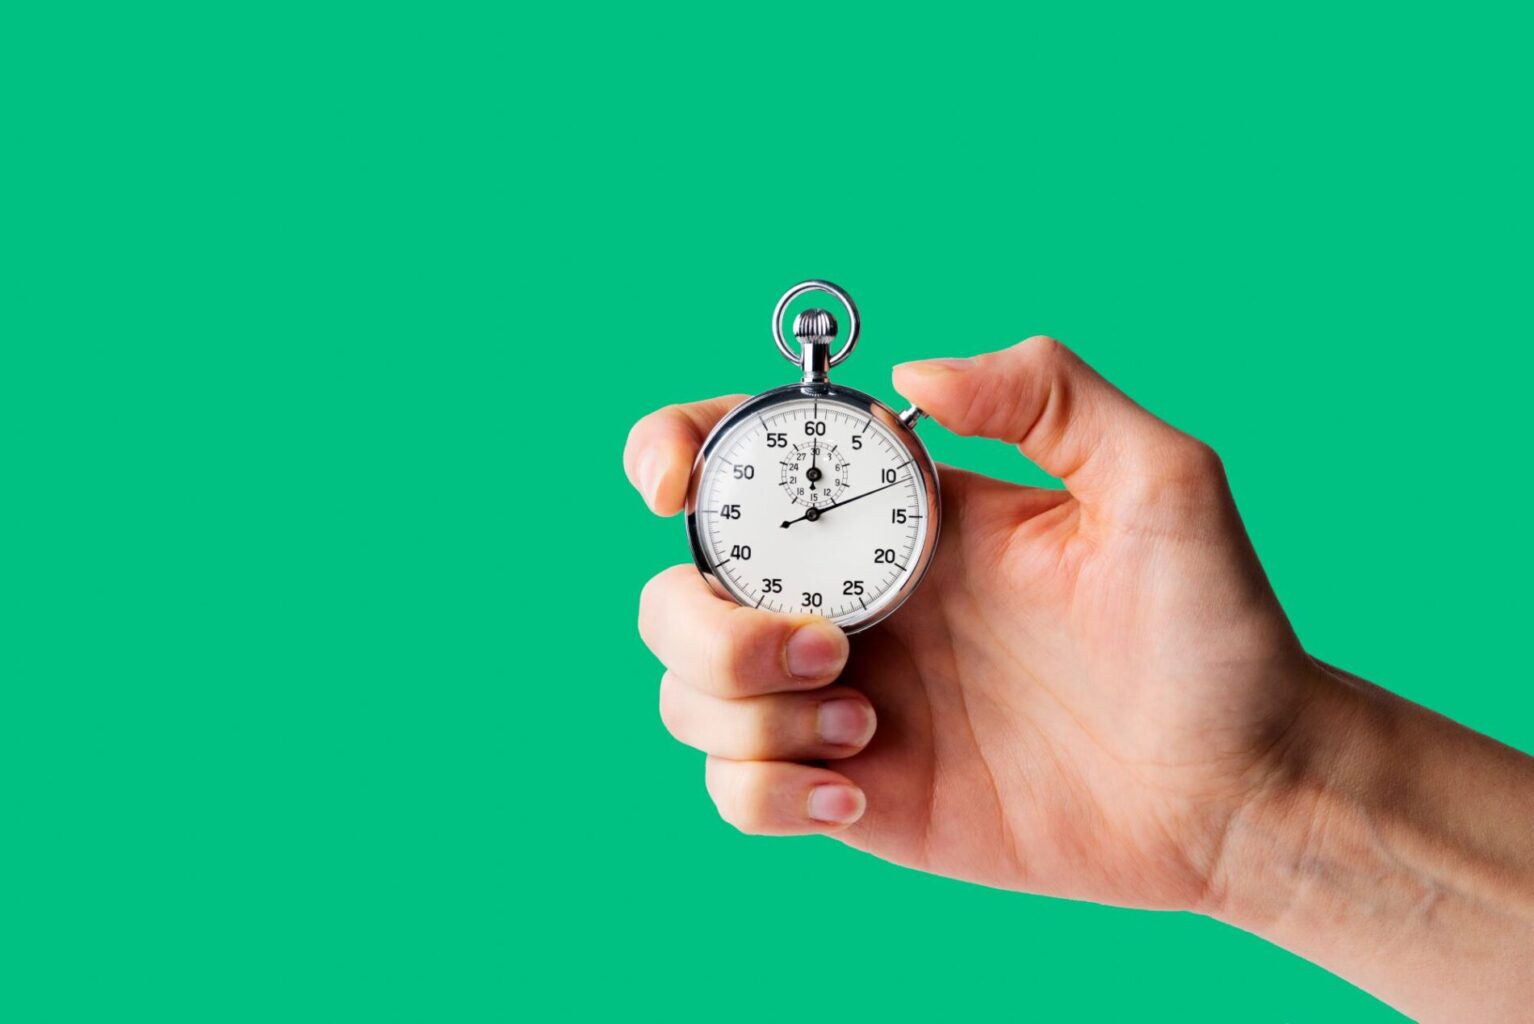 A hand holding a stopwatch, measuring habits, on a green background.